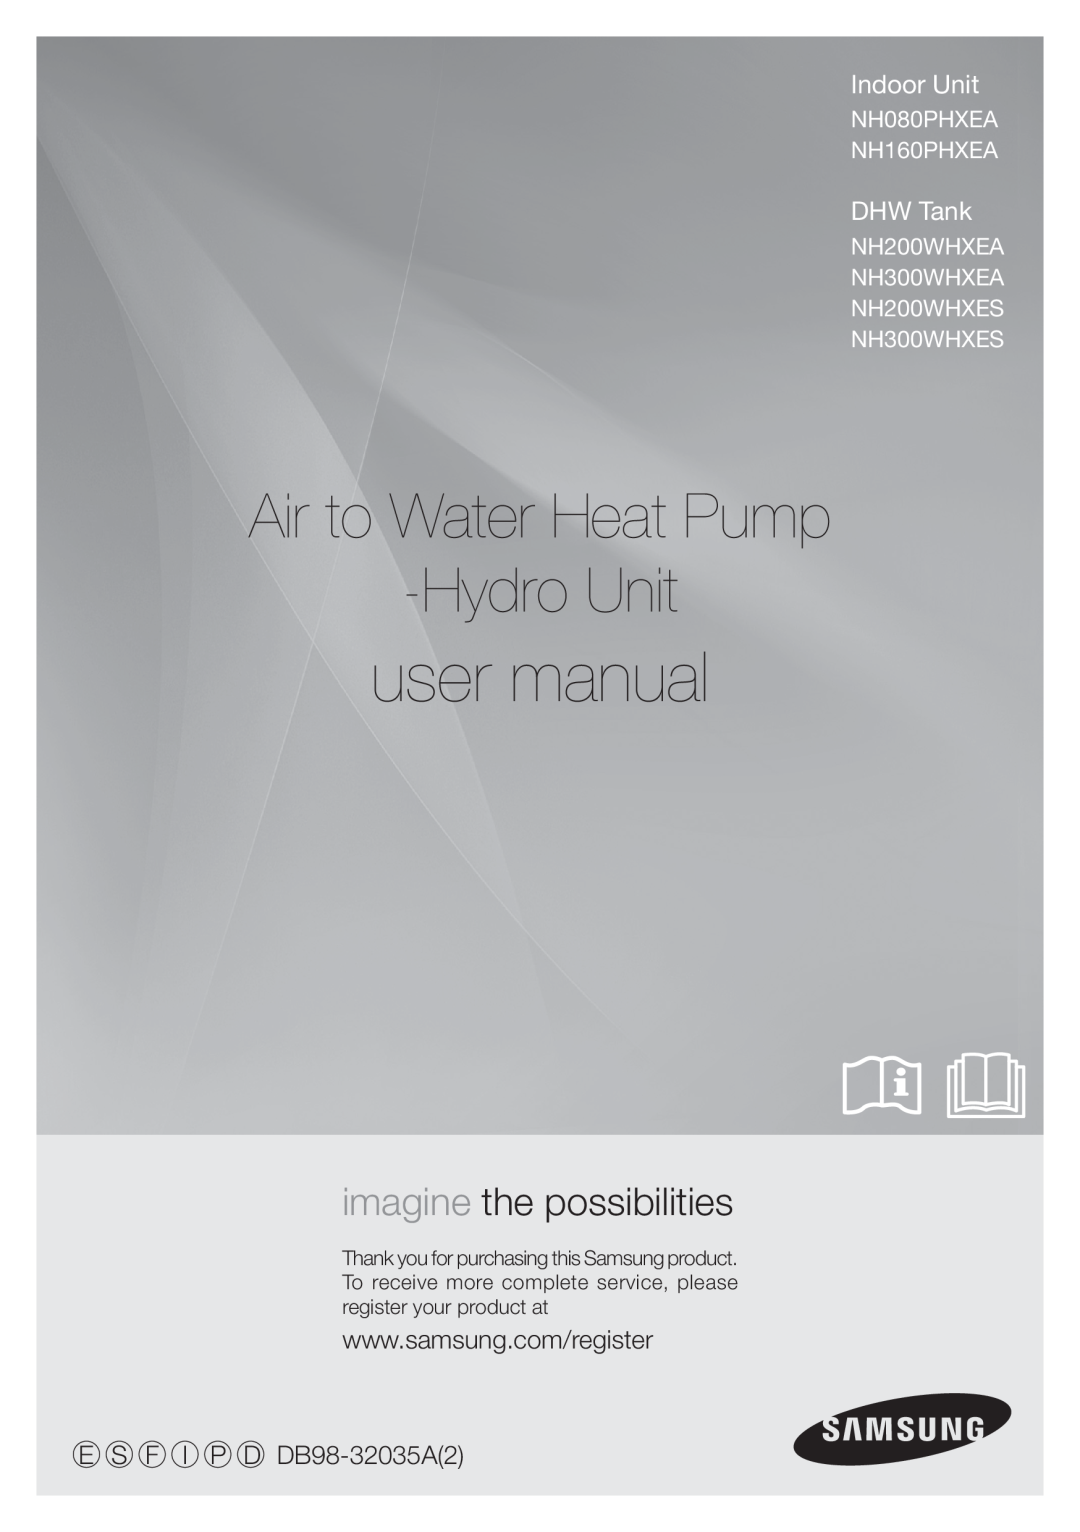 Samsung NH160PHXEA user manual Air to Water Heat Pump HydroUnit, imagine the possibilities, Indoor Unit, DHW Tank 